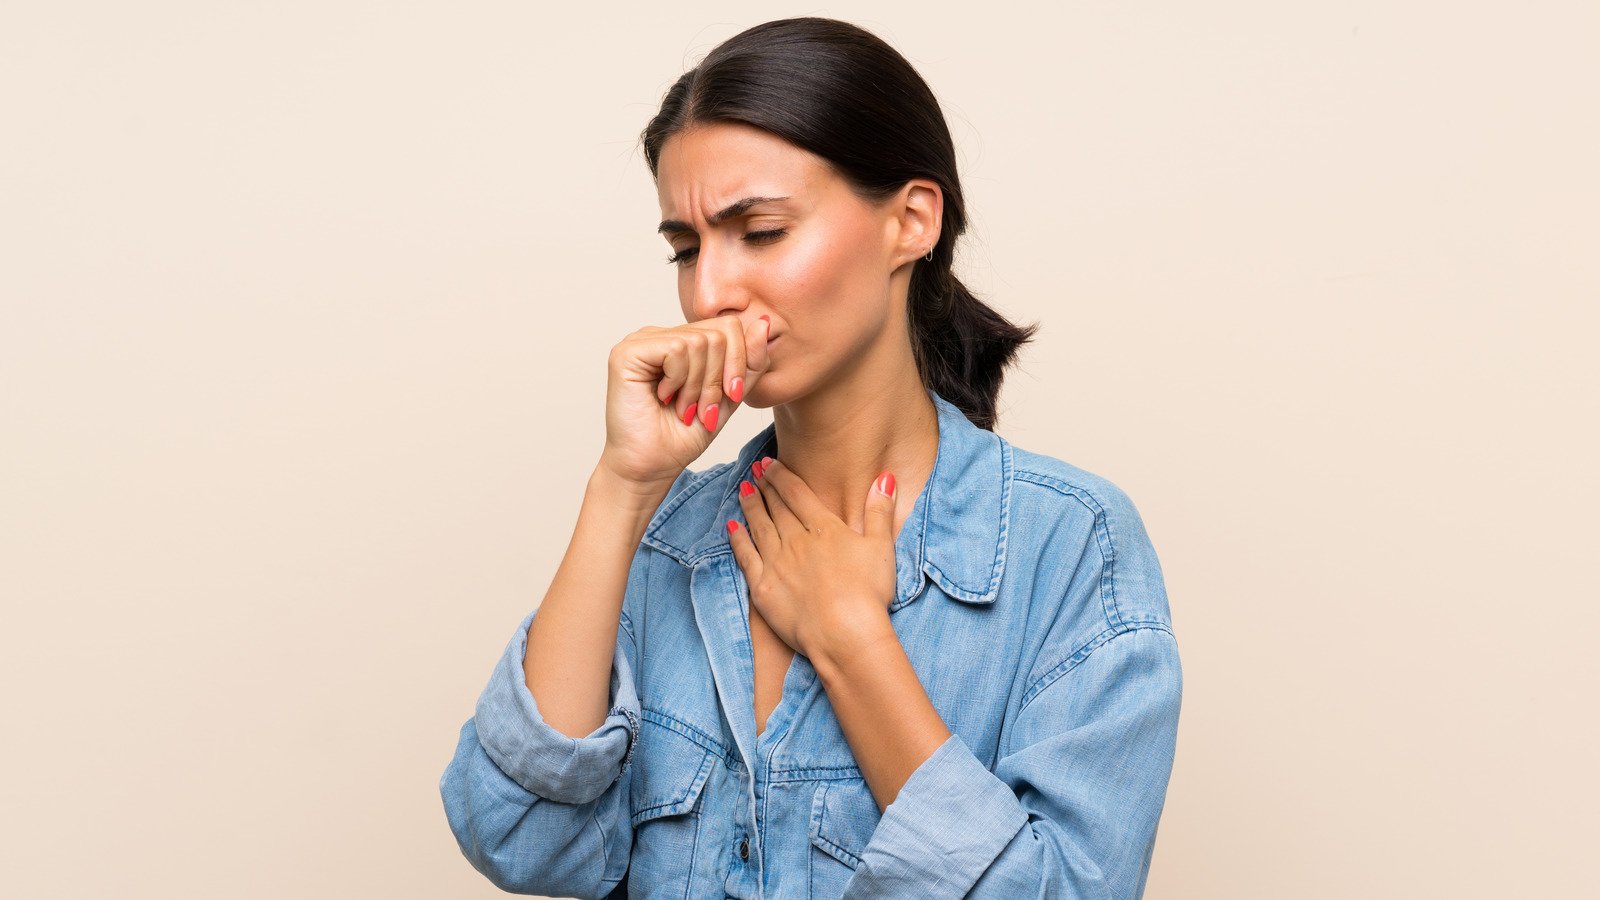 Health Symptoms That Are Serious Red Flags - Health Digest